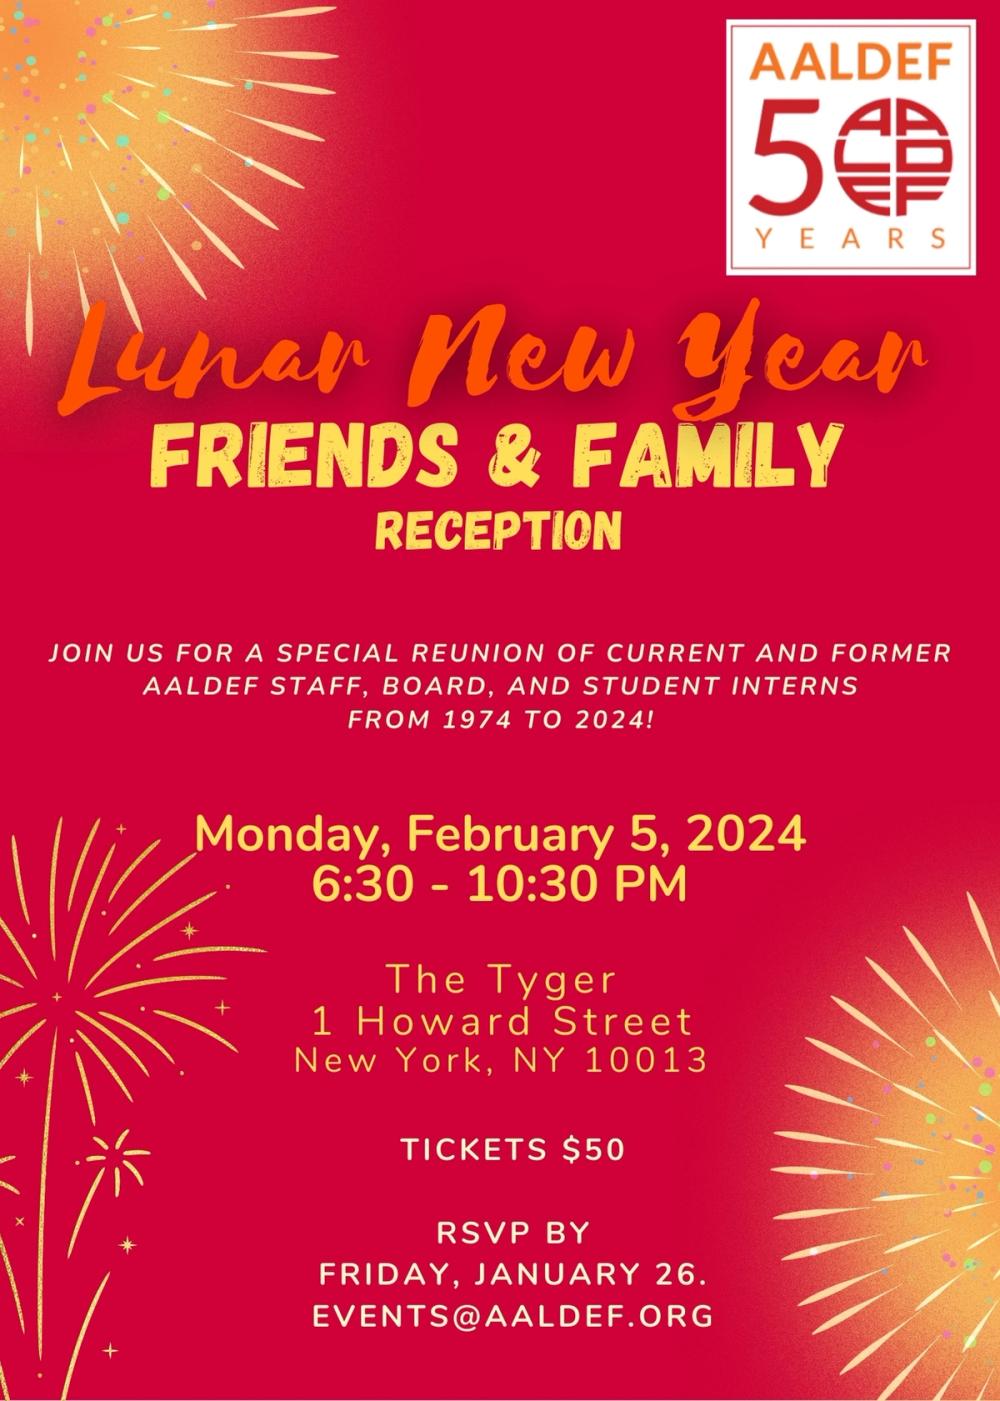 Image for AALDEF Lunar New Year Friends & Family Reception 